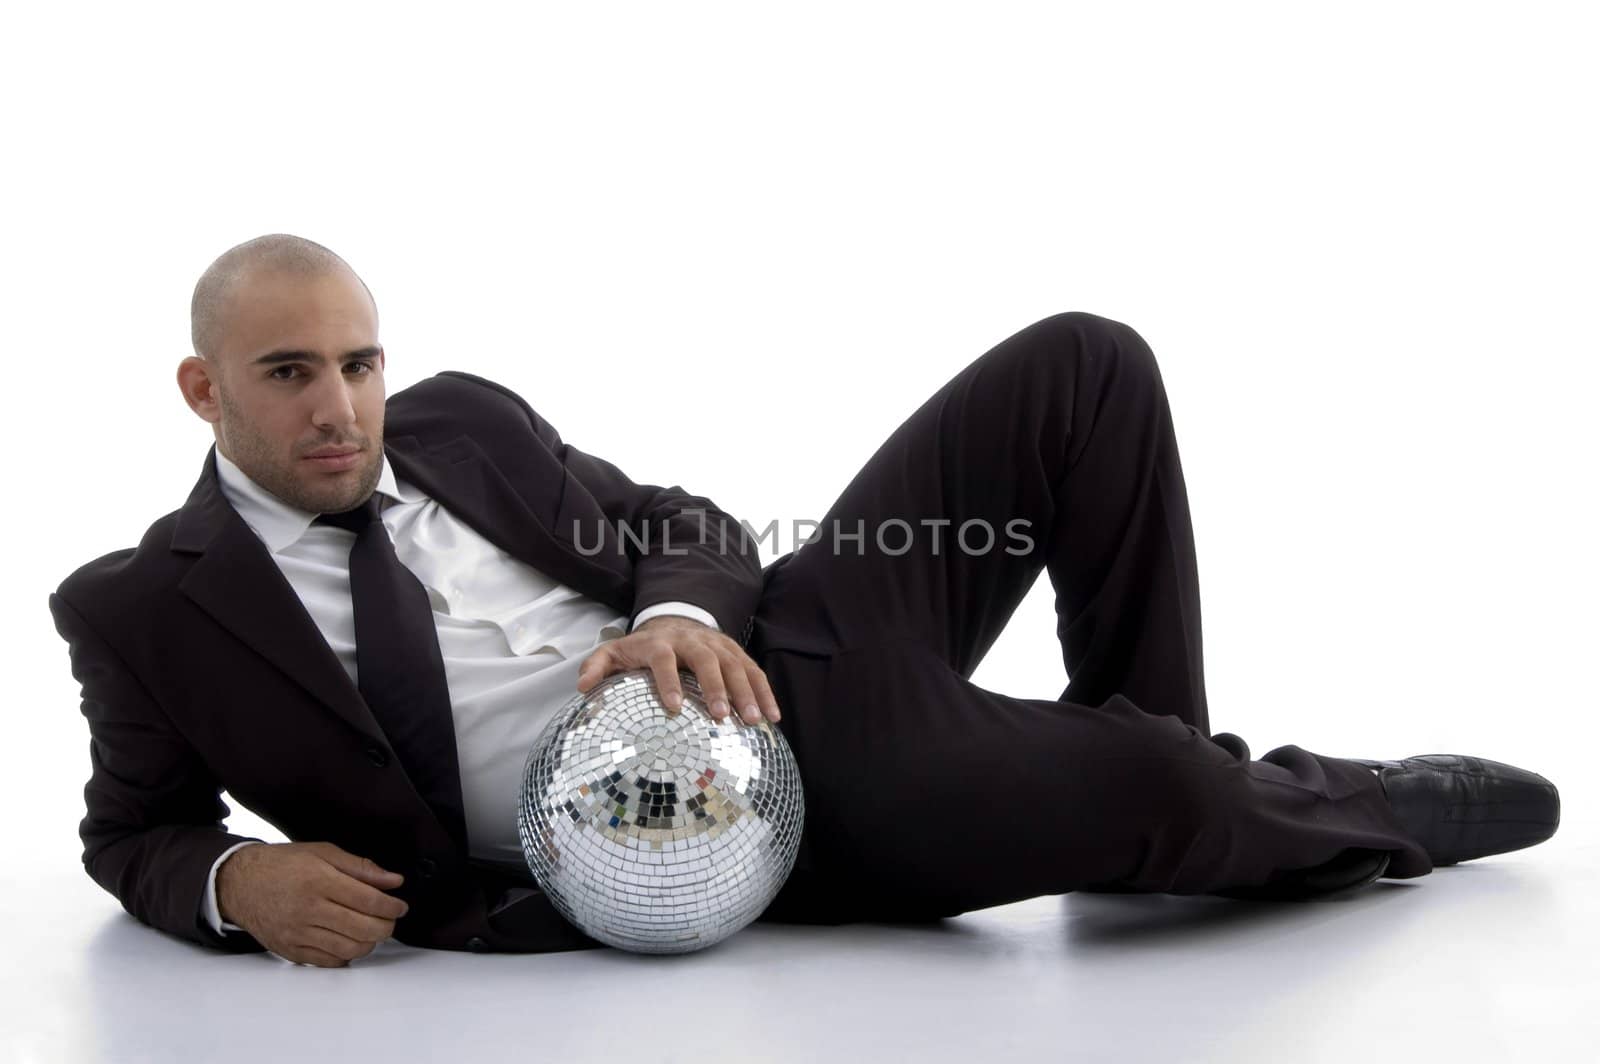 young accountant posing with disco ball by imagerymajestic